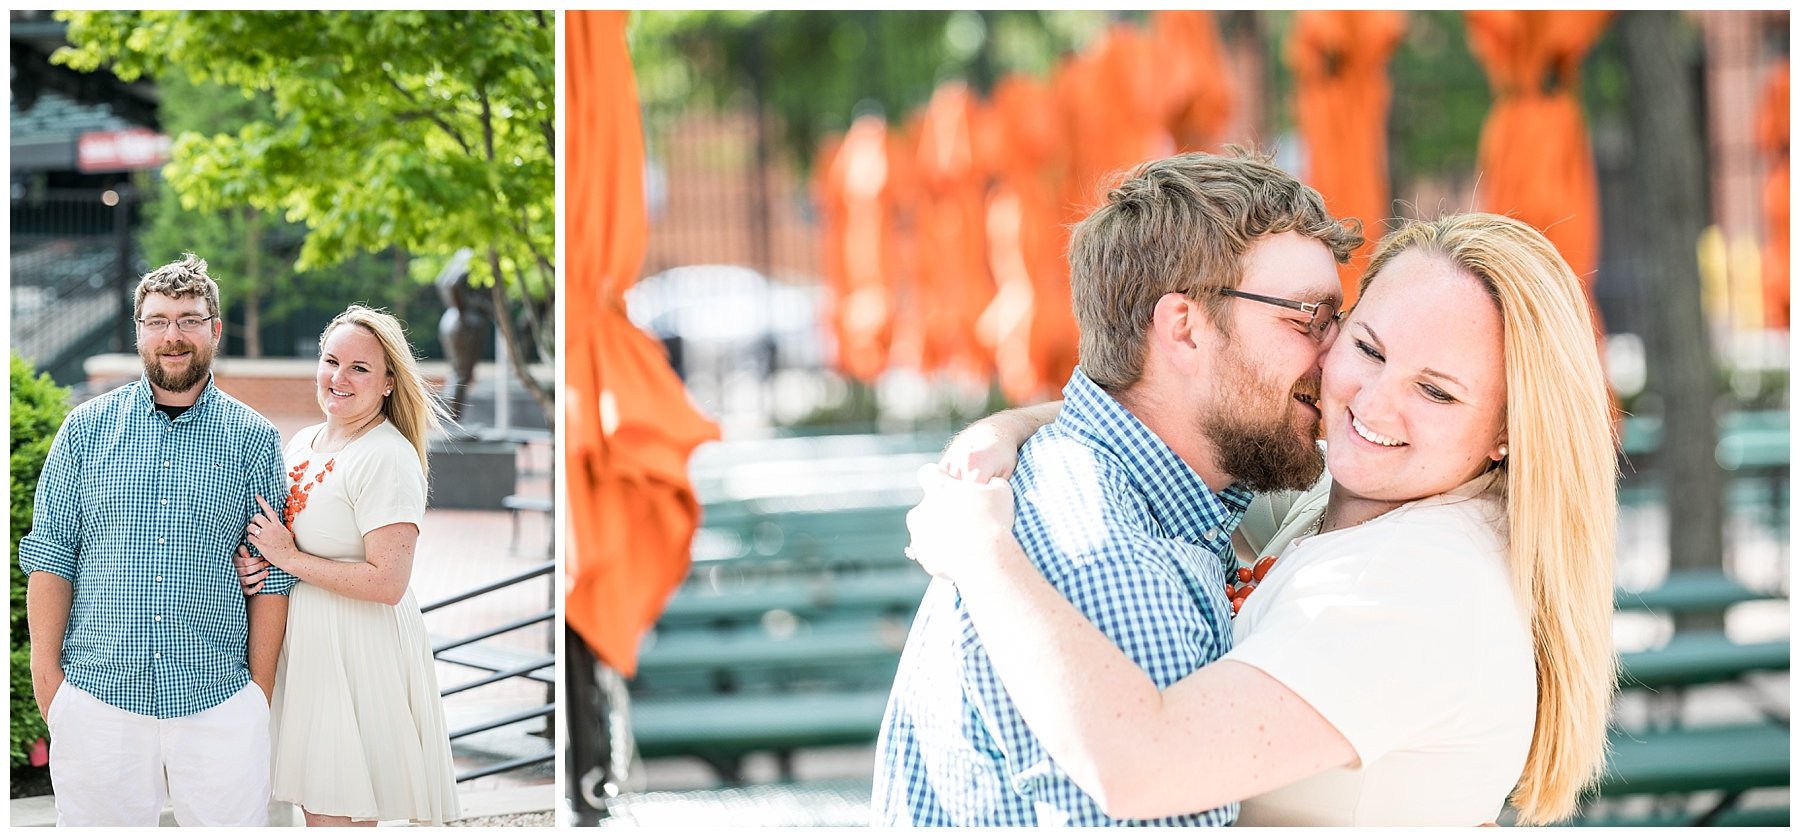 Tess Ray Camden Yards Engagement Session Living Radiant Photography photos_0031.jpg